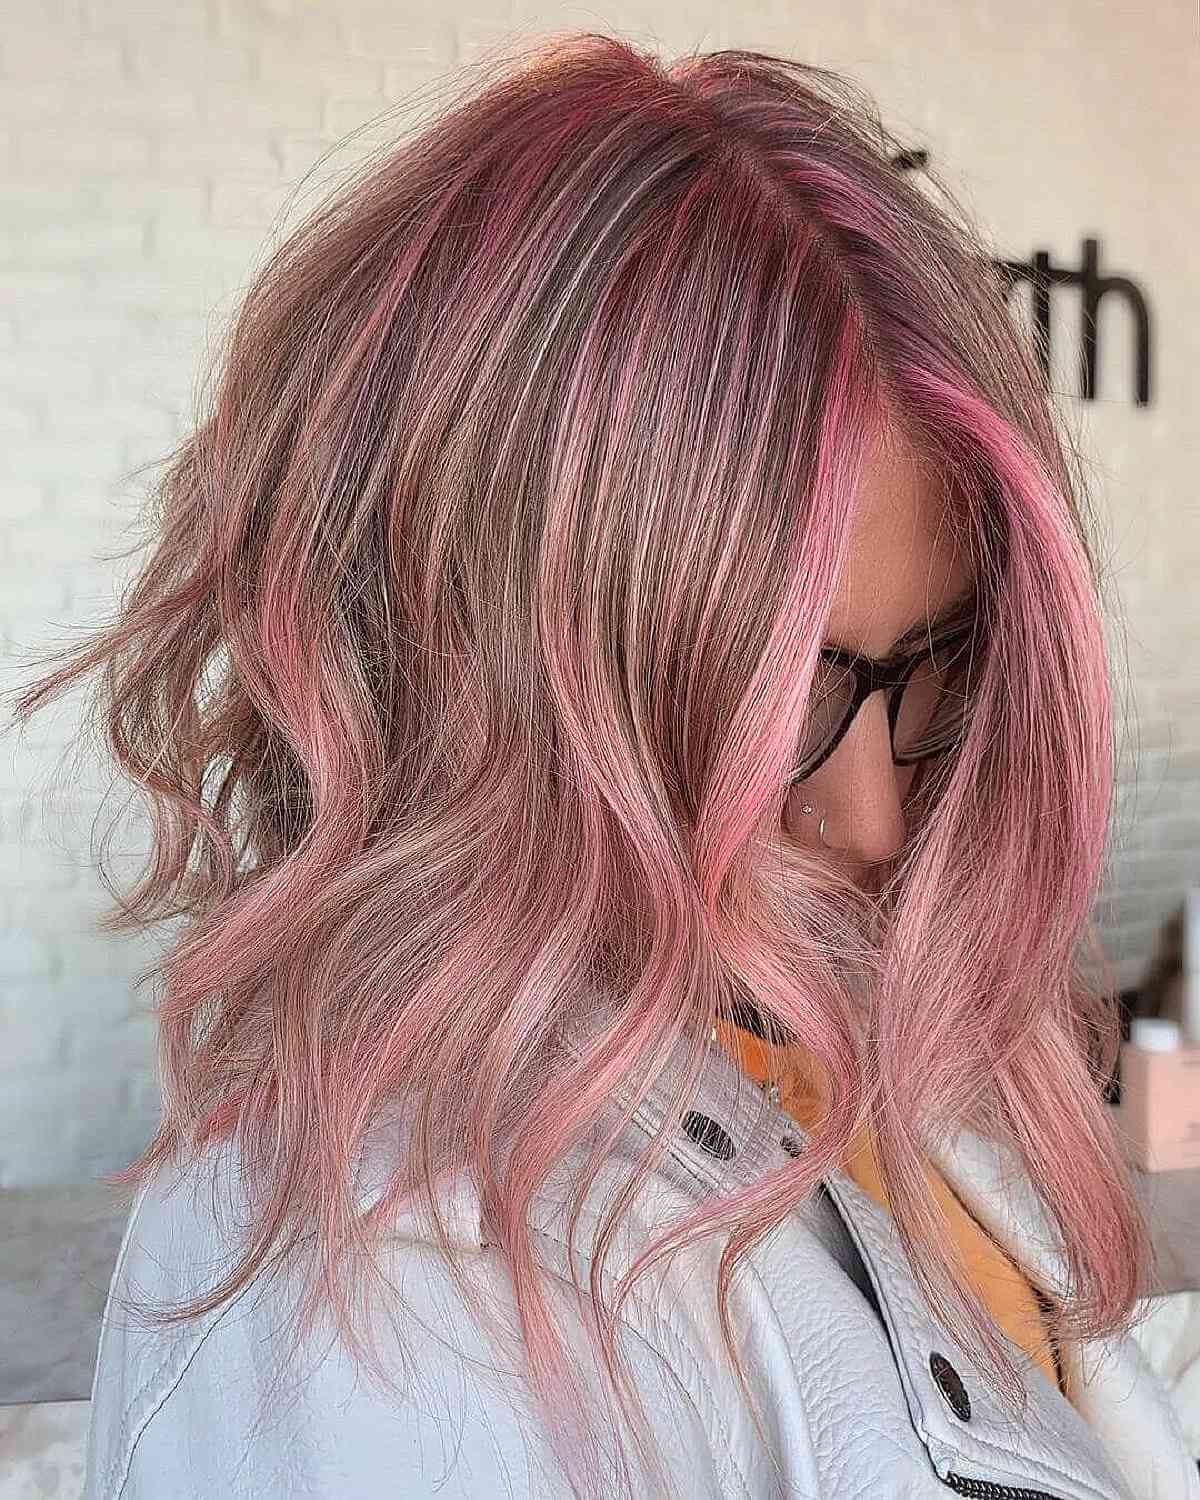 Brown Hair with Light Pink Highlights